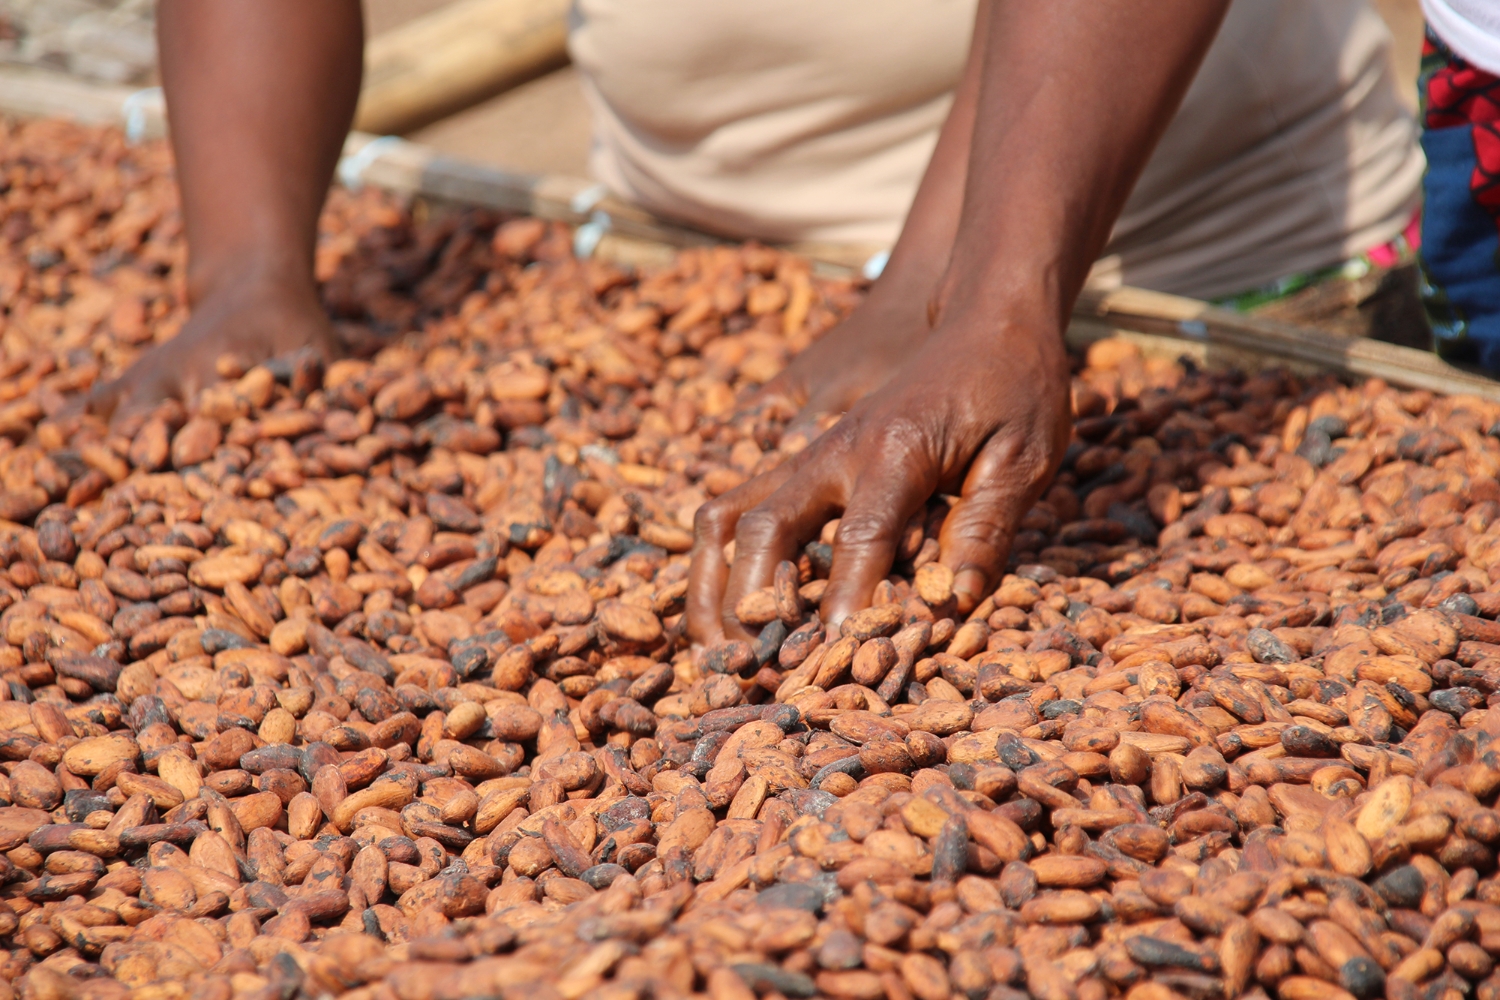 West African cocoa cartel battles with the traders